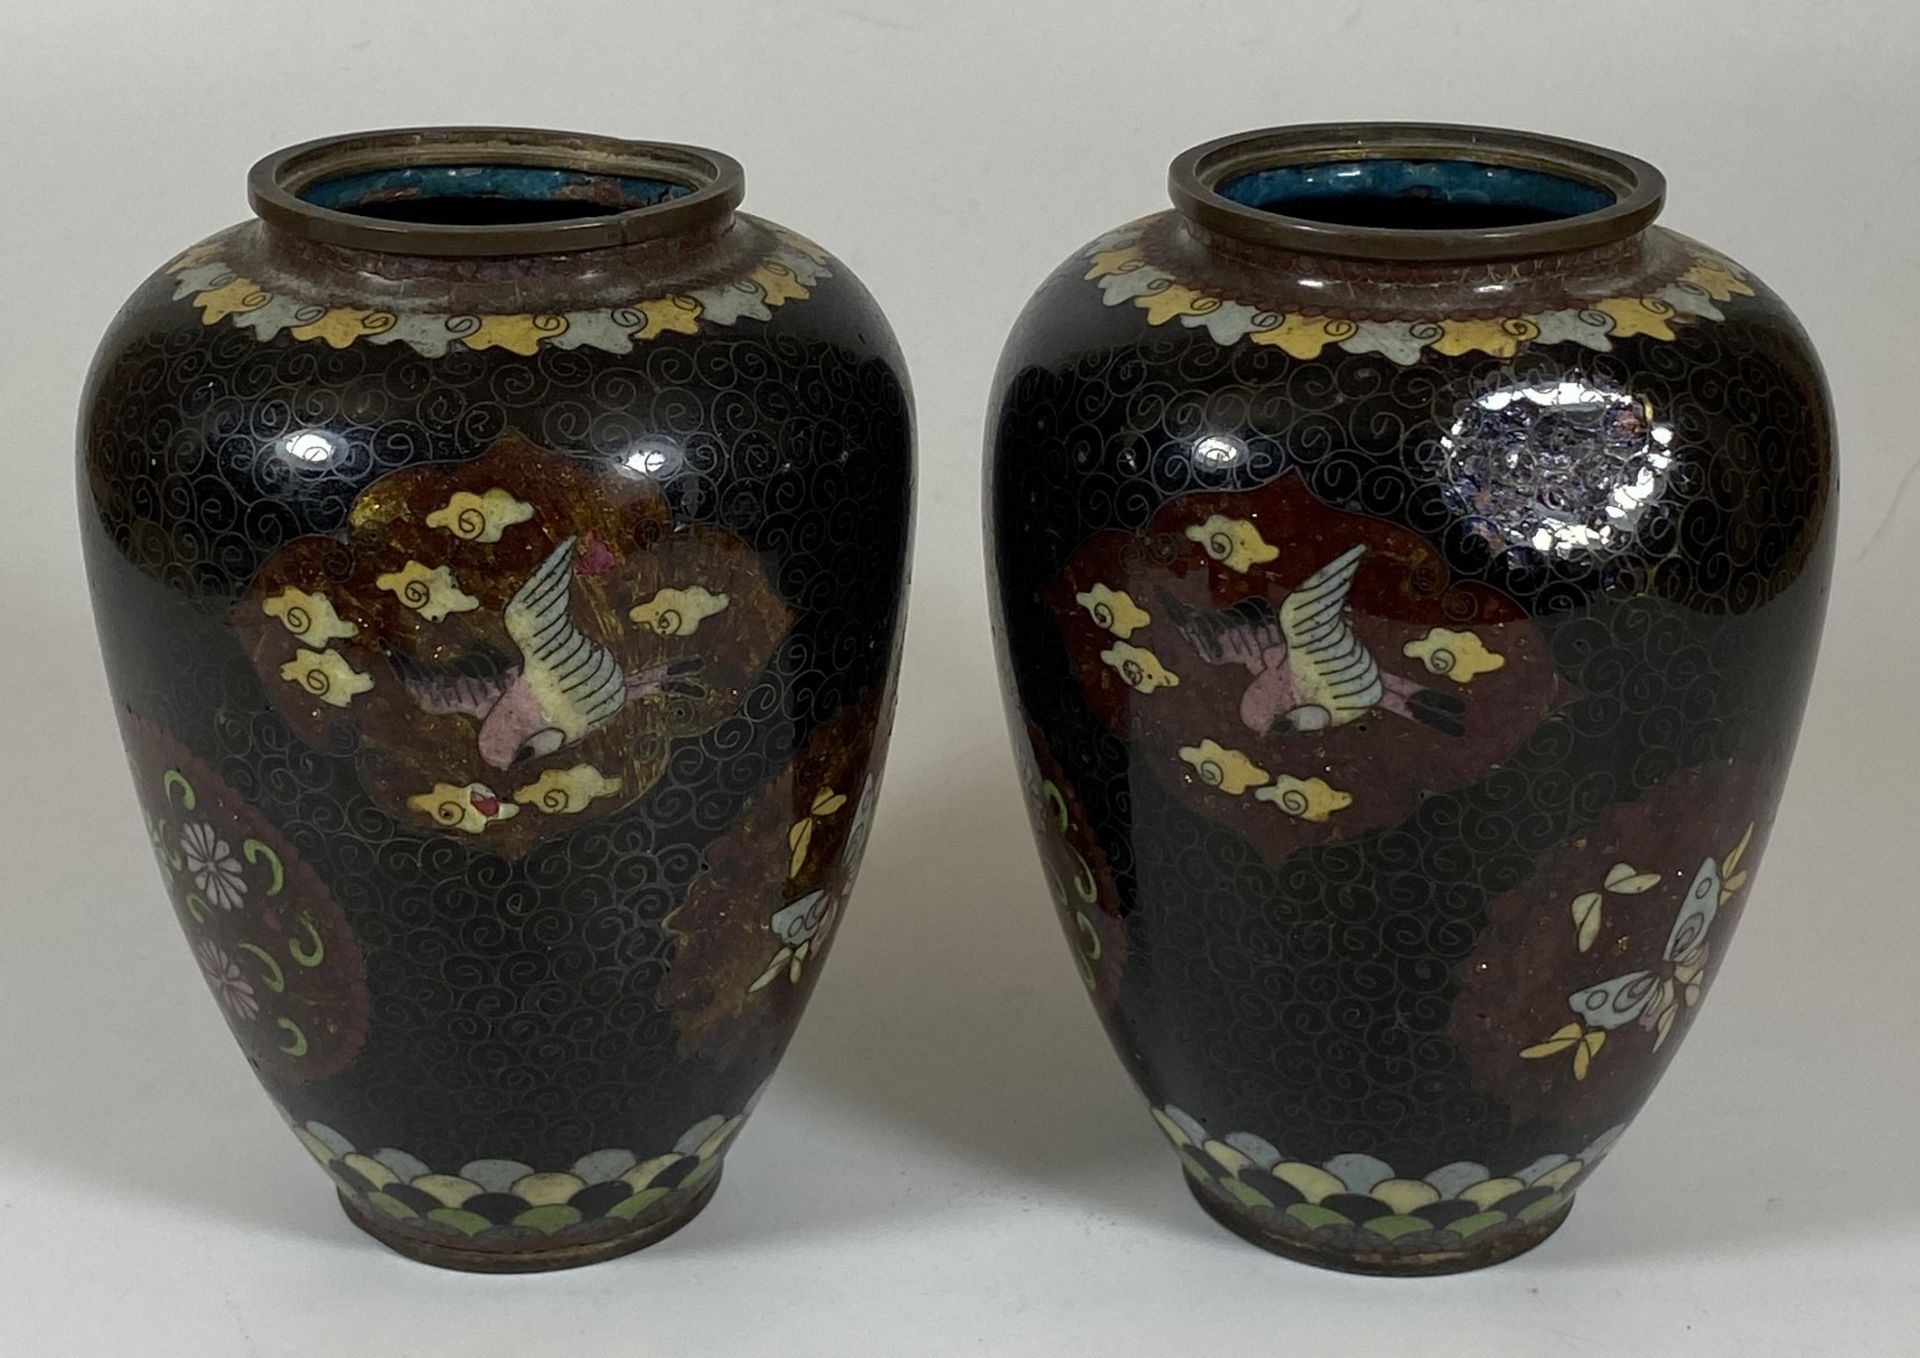 A PAIR OF JAPANESE MEIJI PERIOD (1868-1912) BIRD AND FLORAL DESIGN CLOISONNE OVOID FORM VASES,